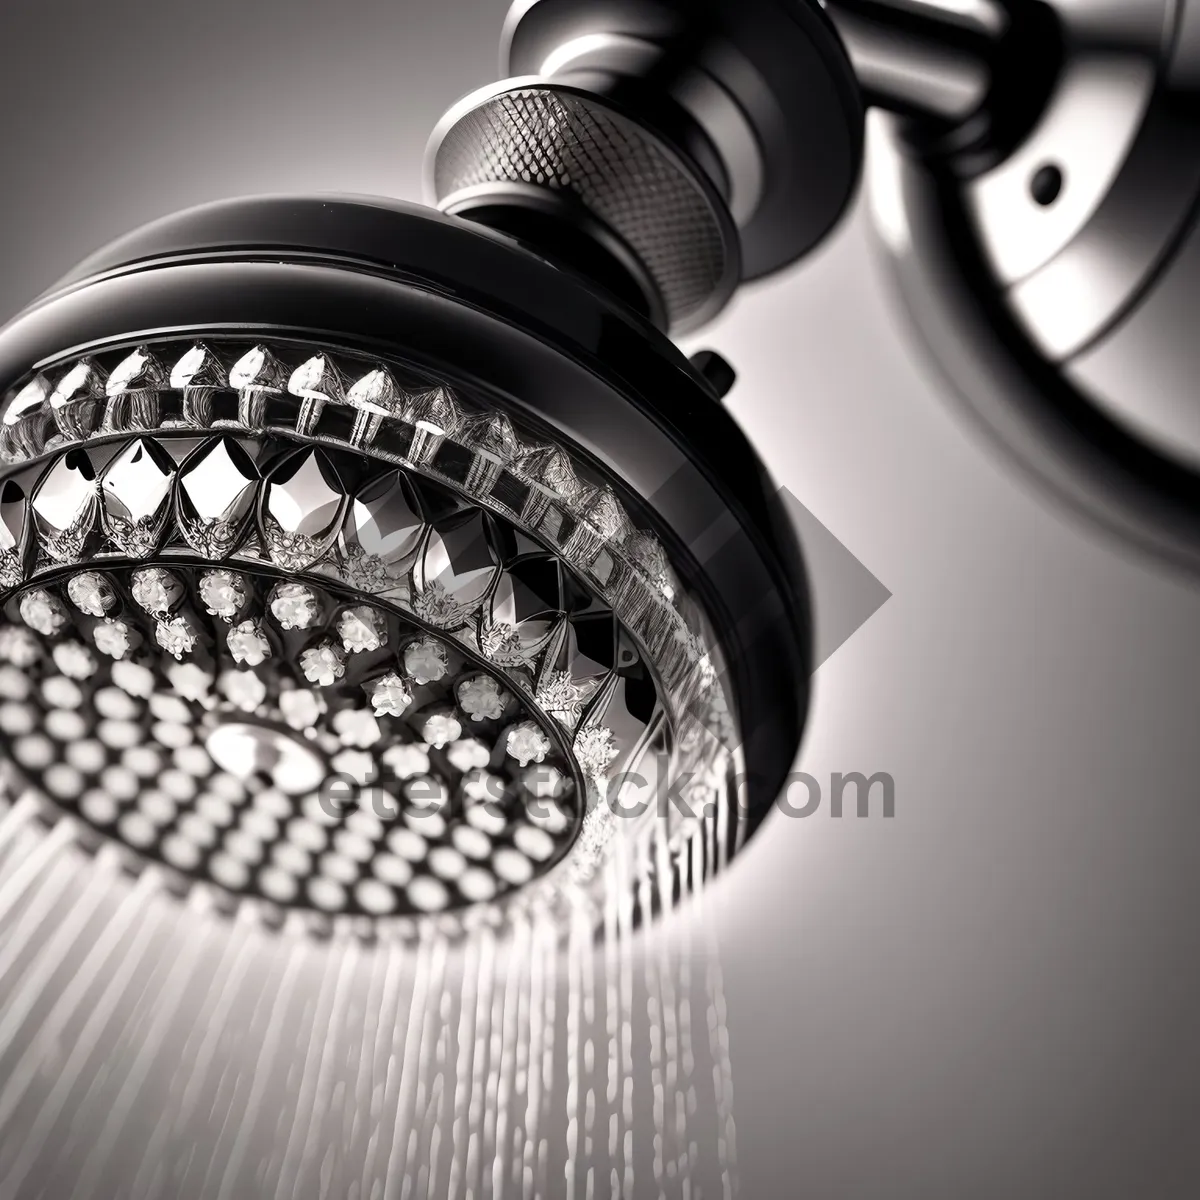 Picture of High-Tech Metal Shower Equipment with Sound